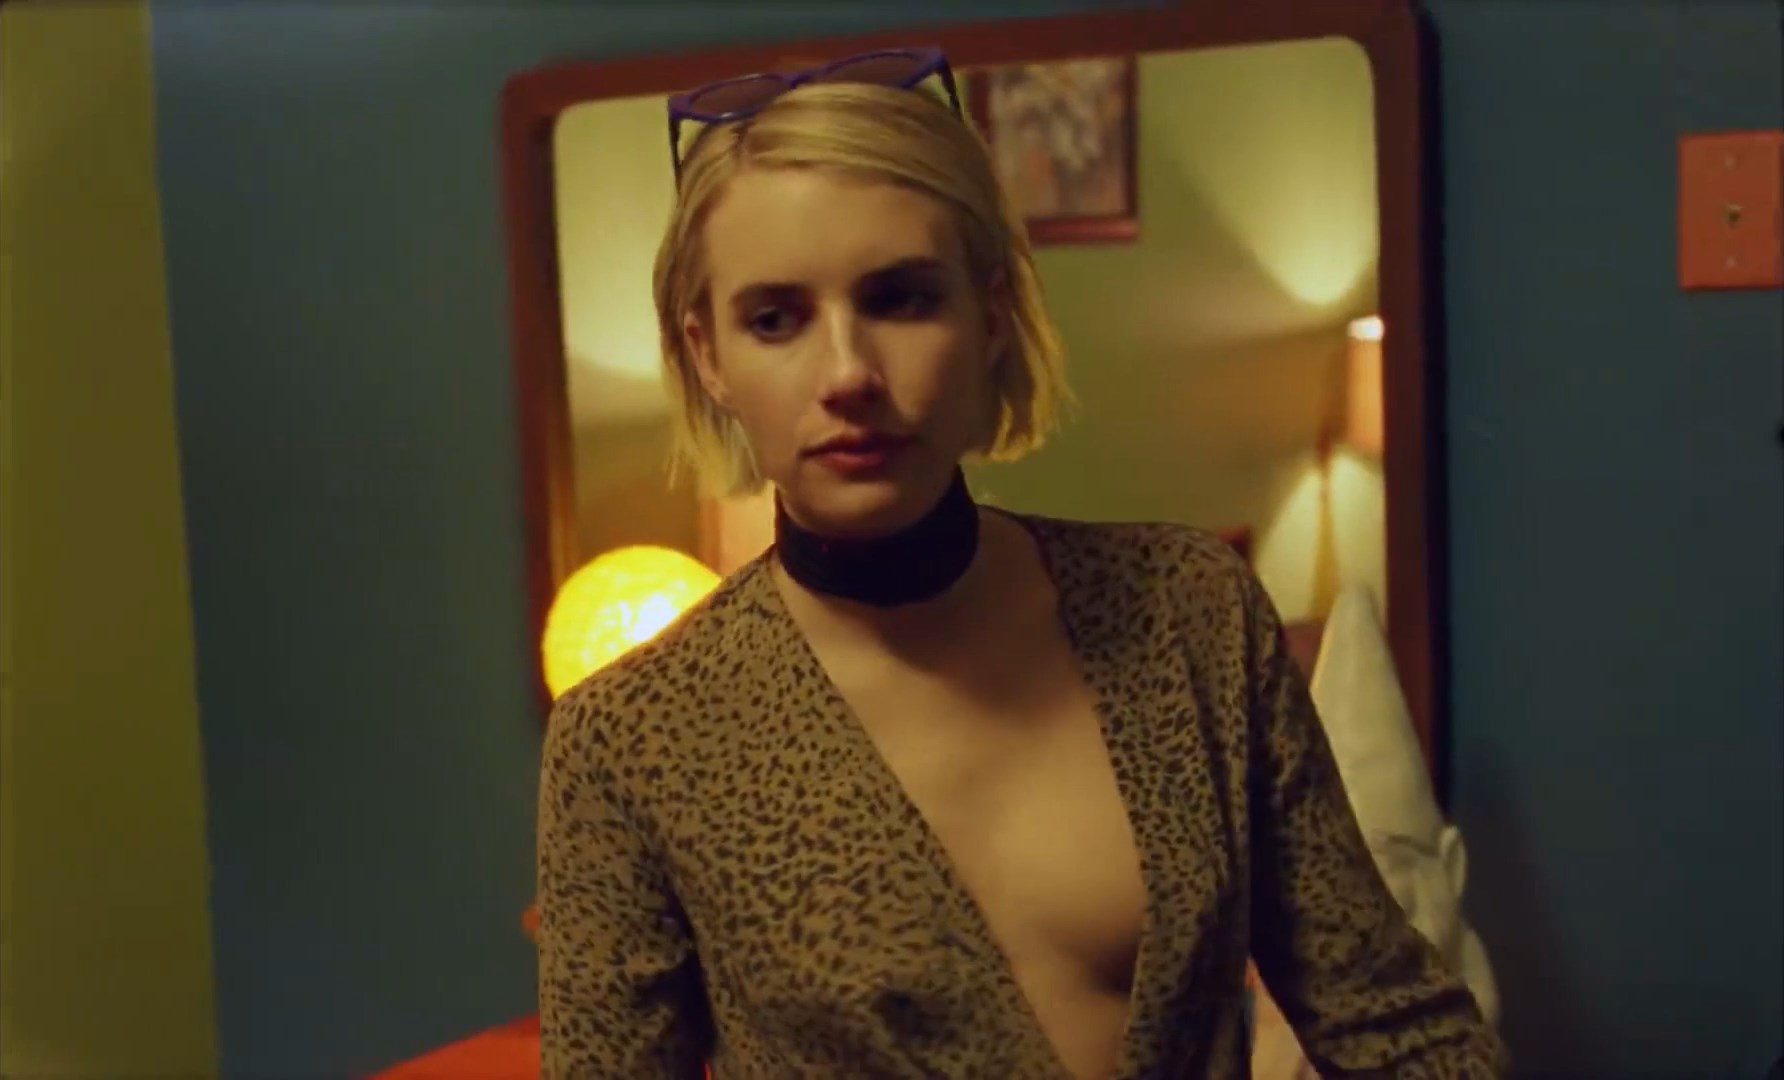 Emma Roberts is very sexy in “Time of Day” which was released in 2018. 